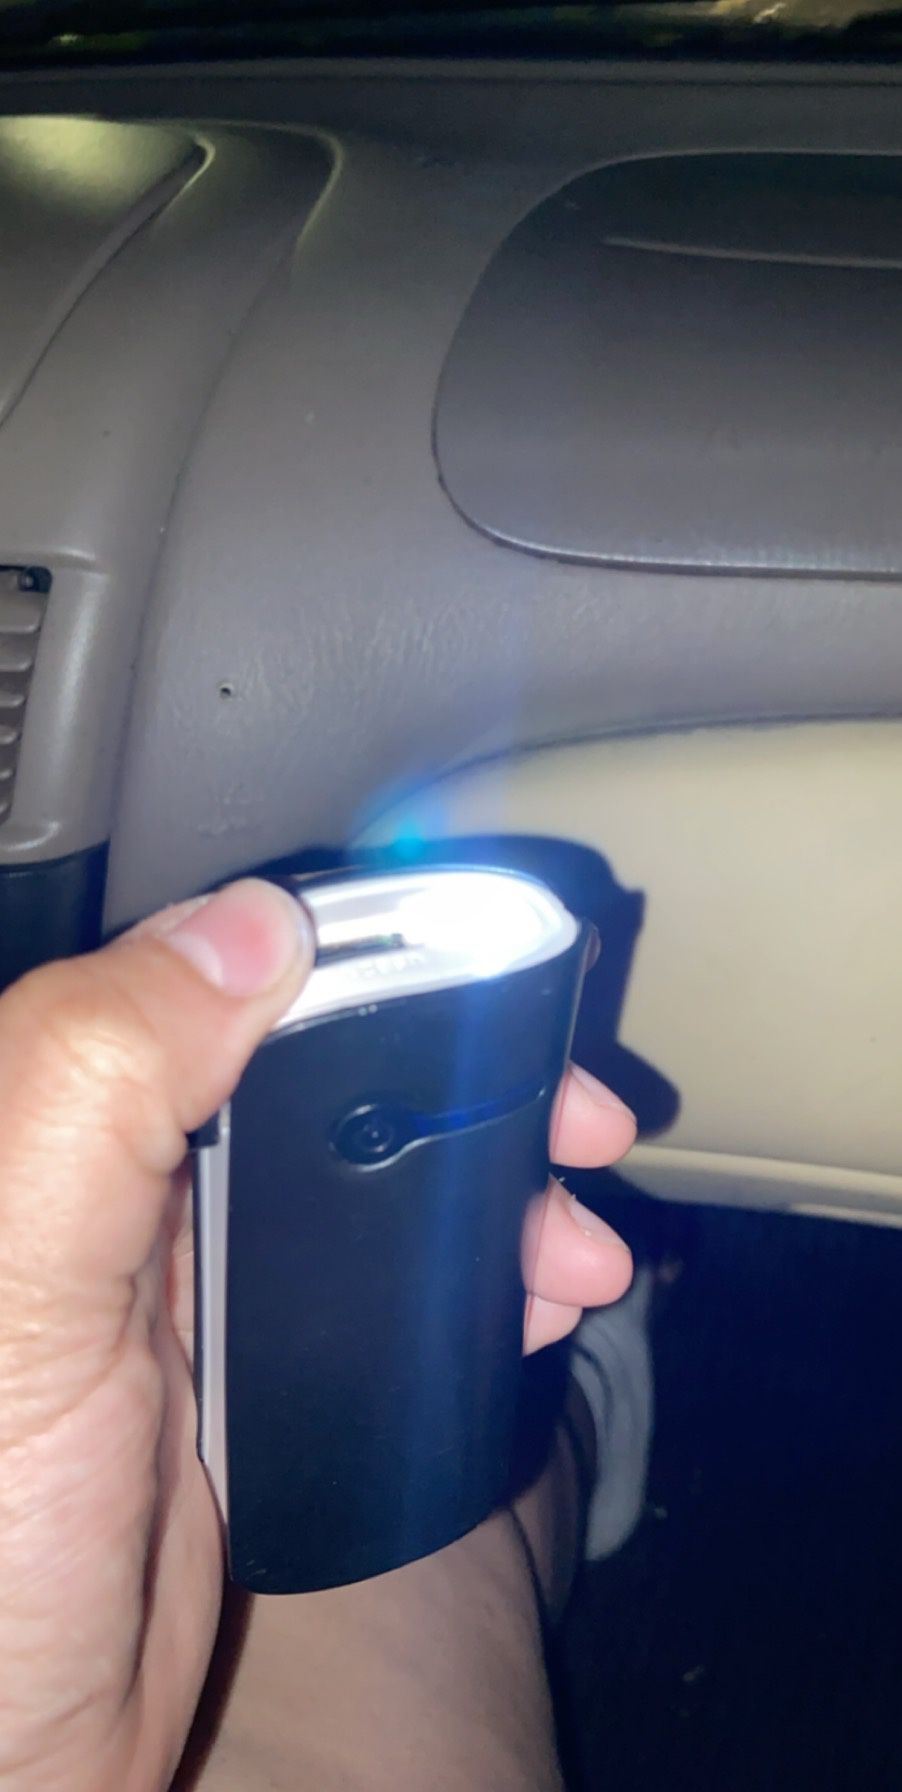 Portable charger with flashlight works good